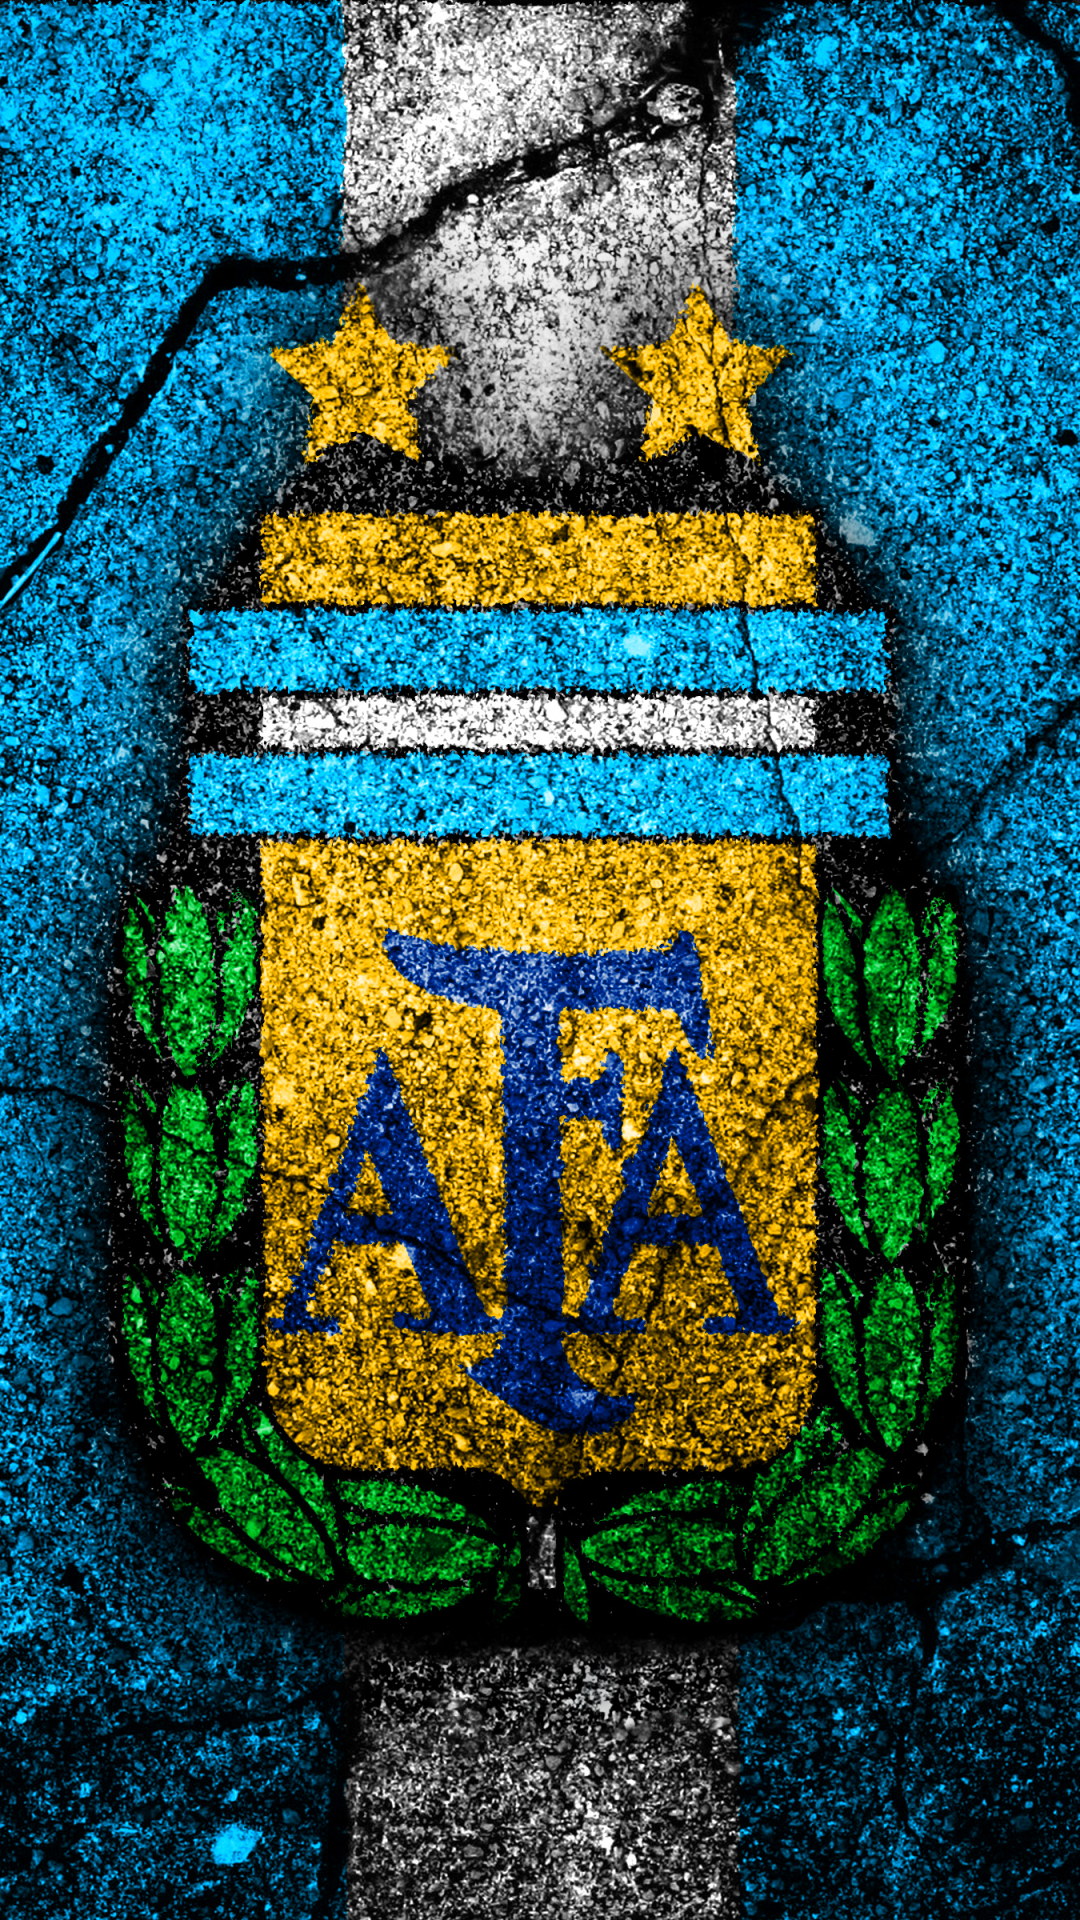 Argentina national football team Phone Wallpaper - Mobile Abyss